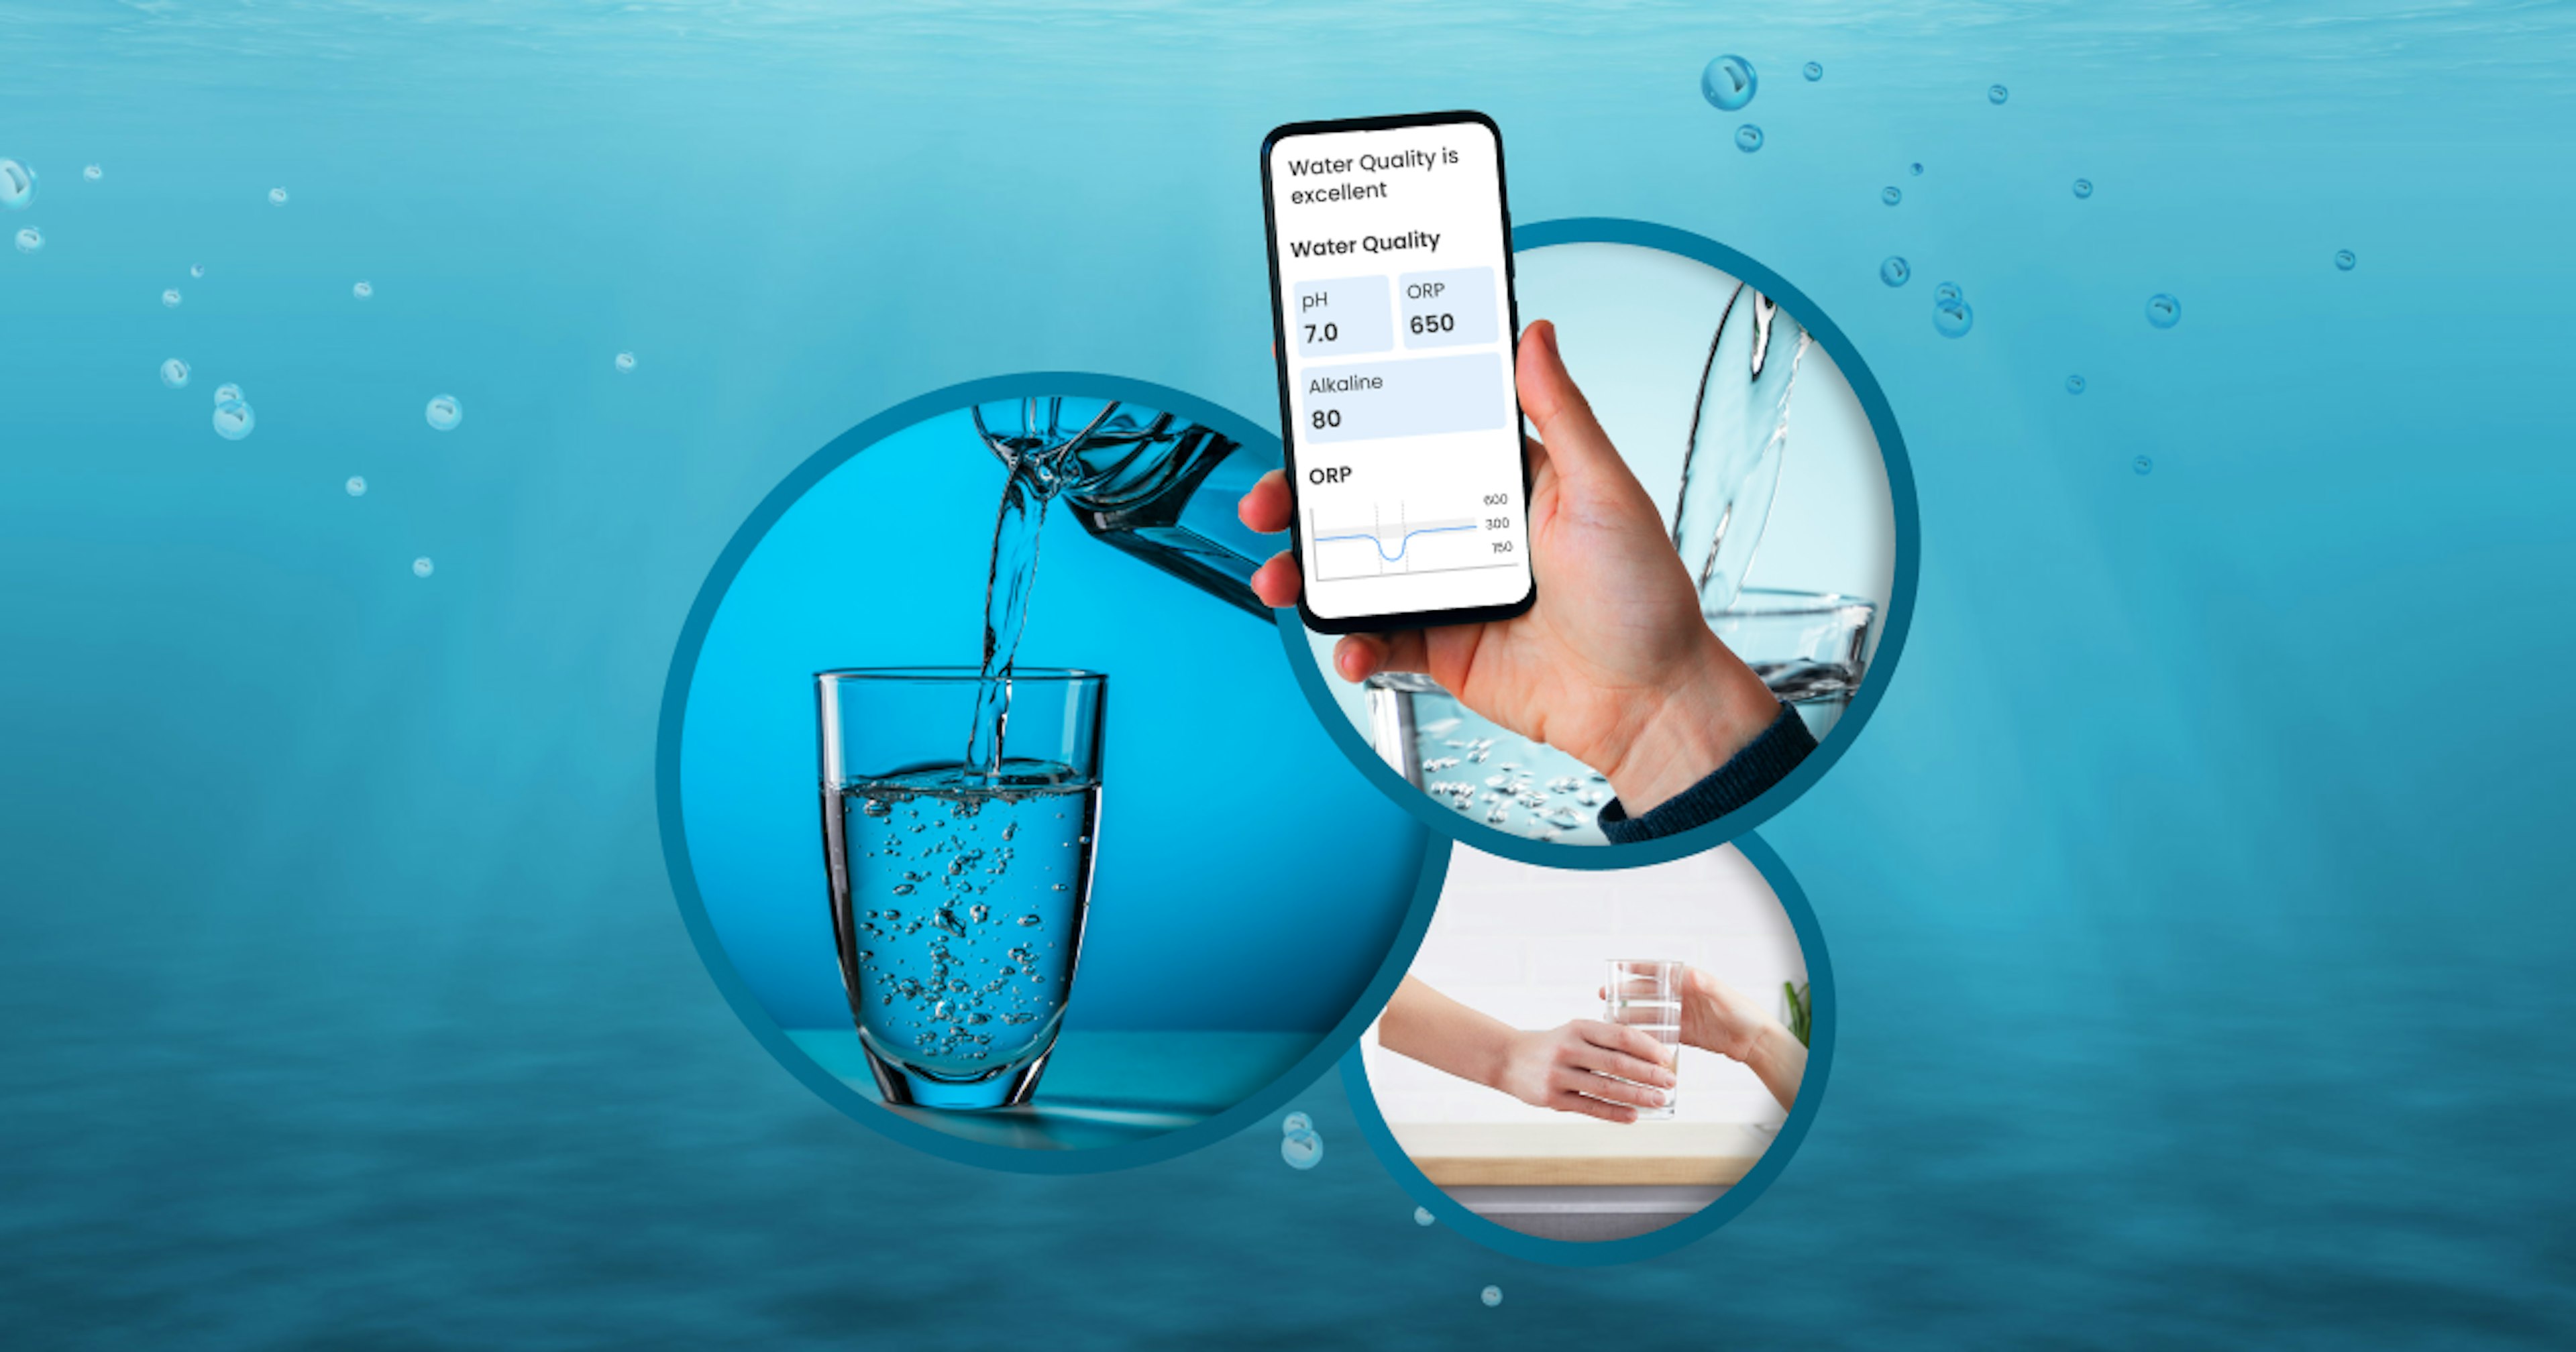 IoT In Worldwide Use For Clean Drinking Water